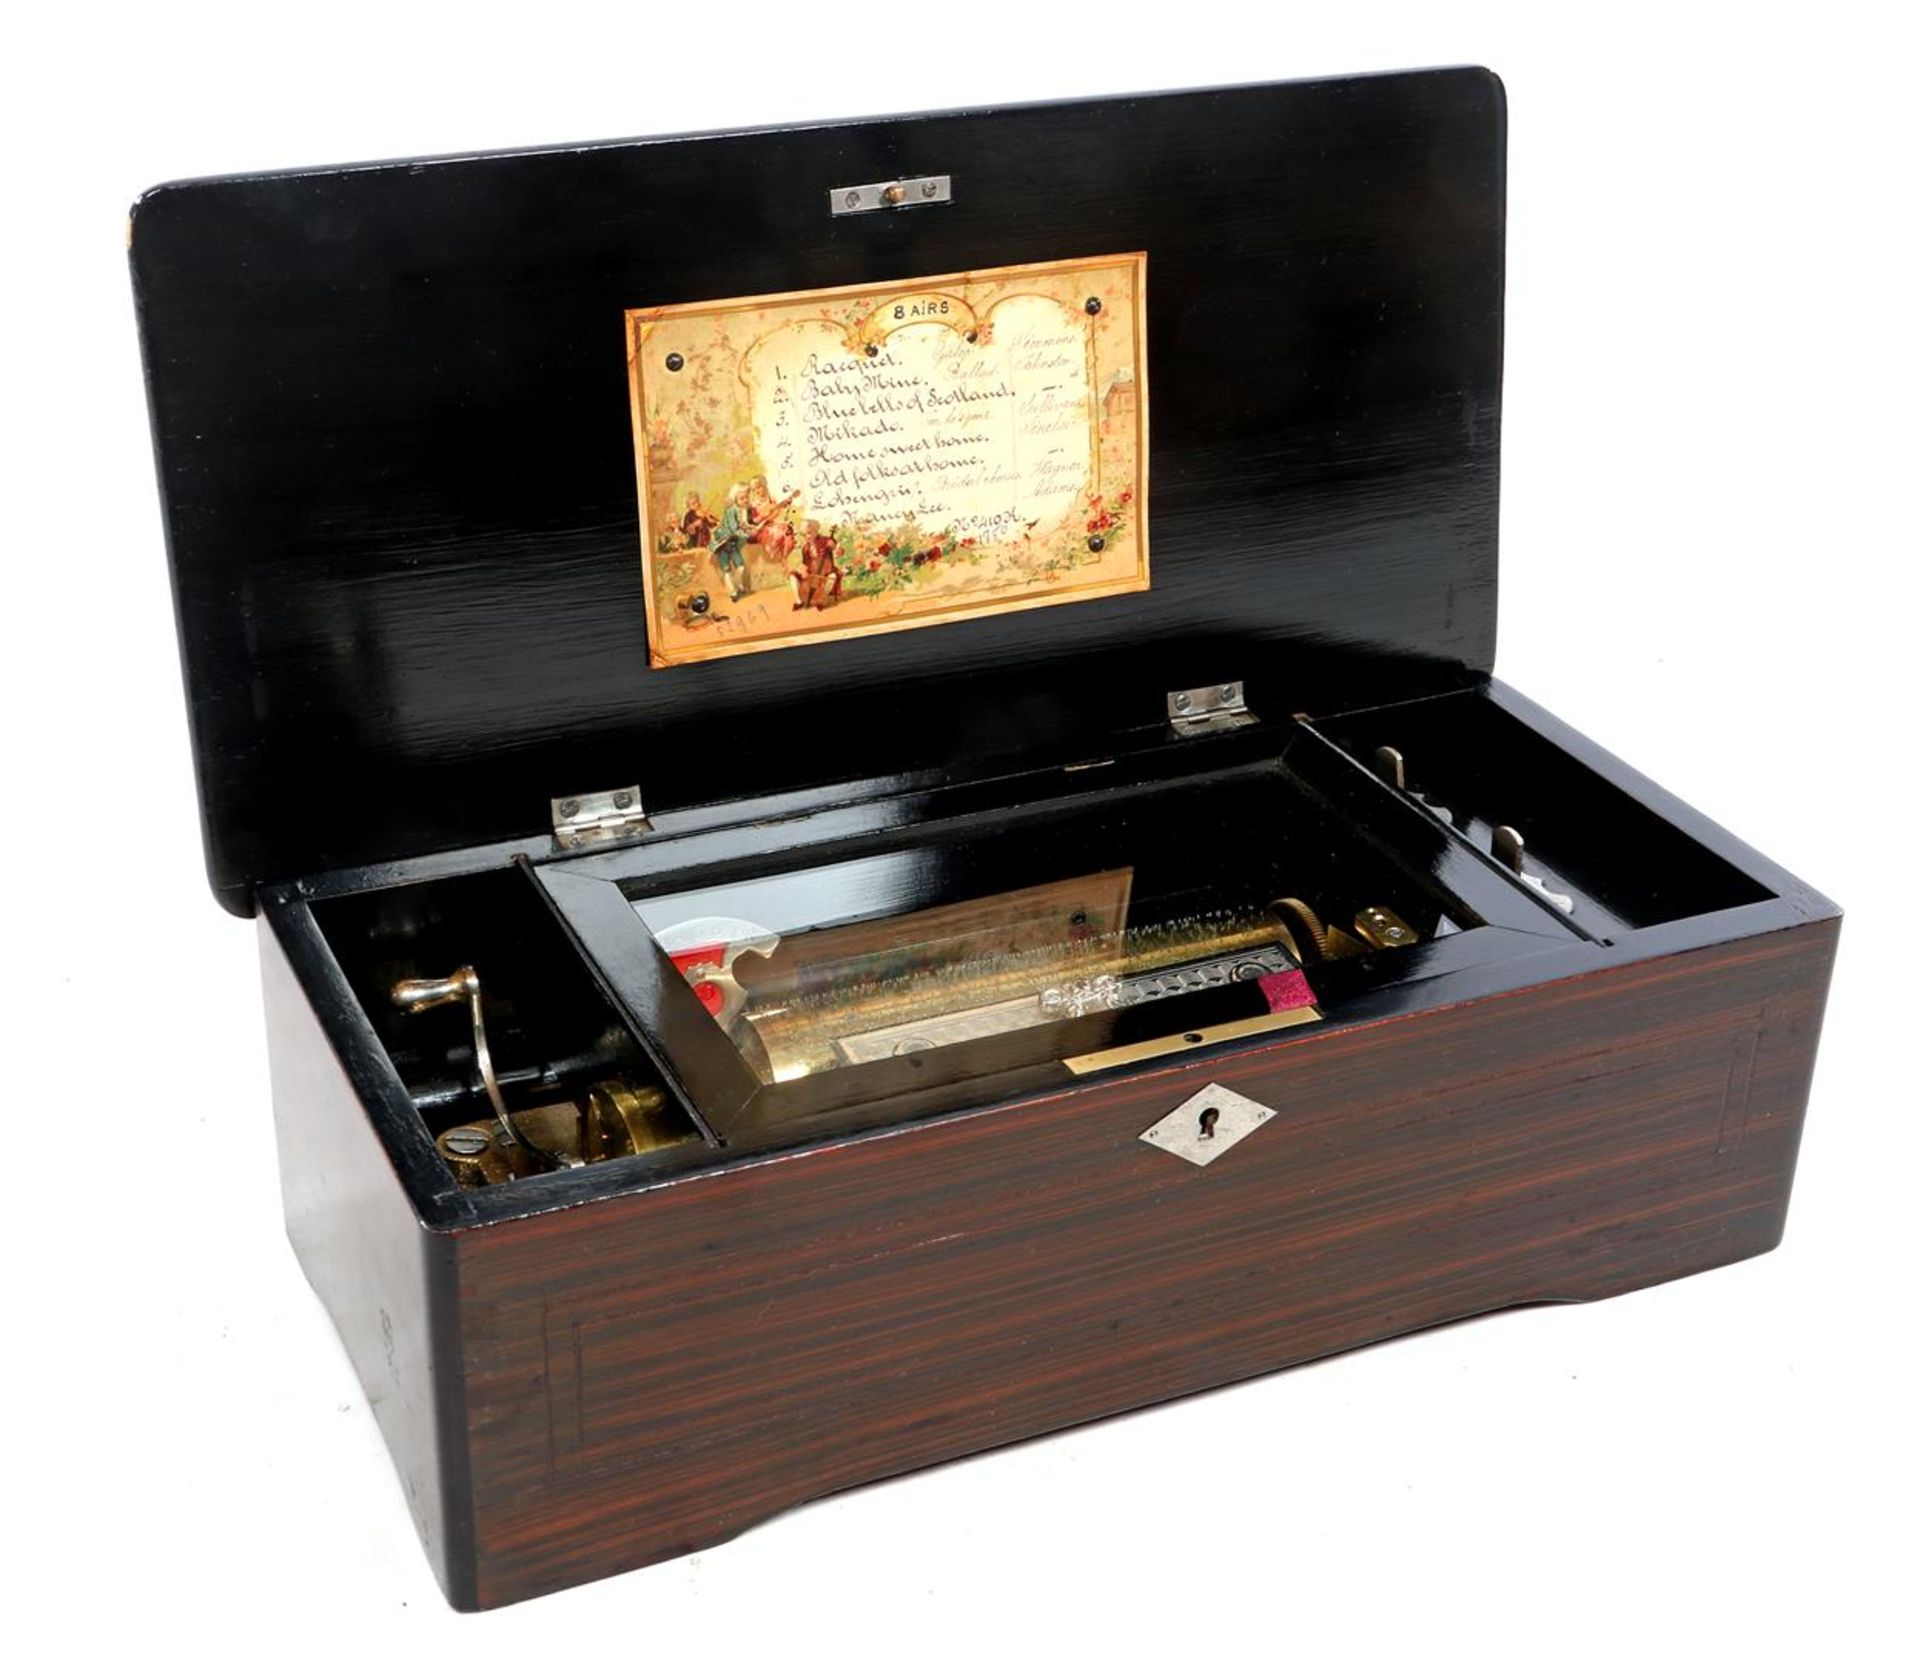 Very nice 19th century music box with roll with 8 melodies. Cabinet with & nbsp; inlaid piping &